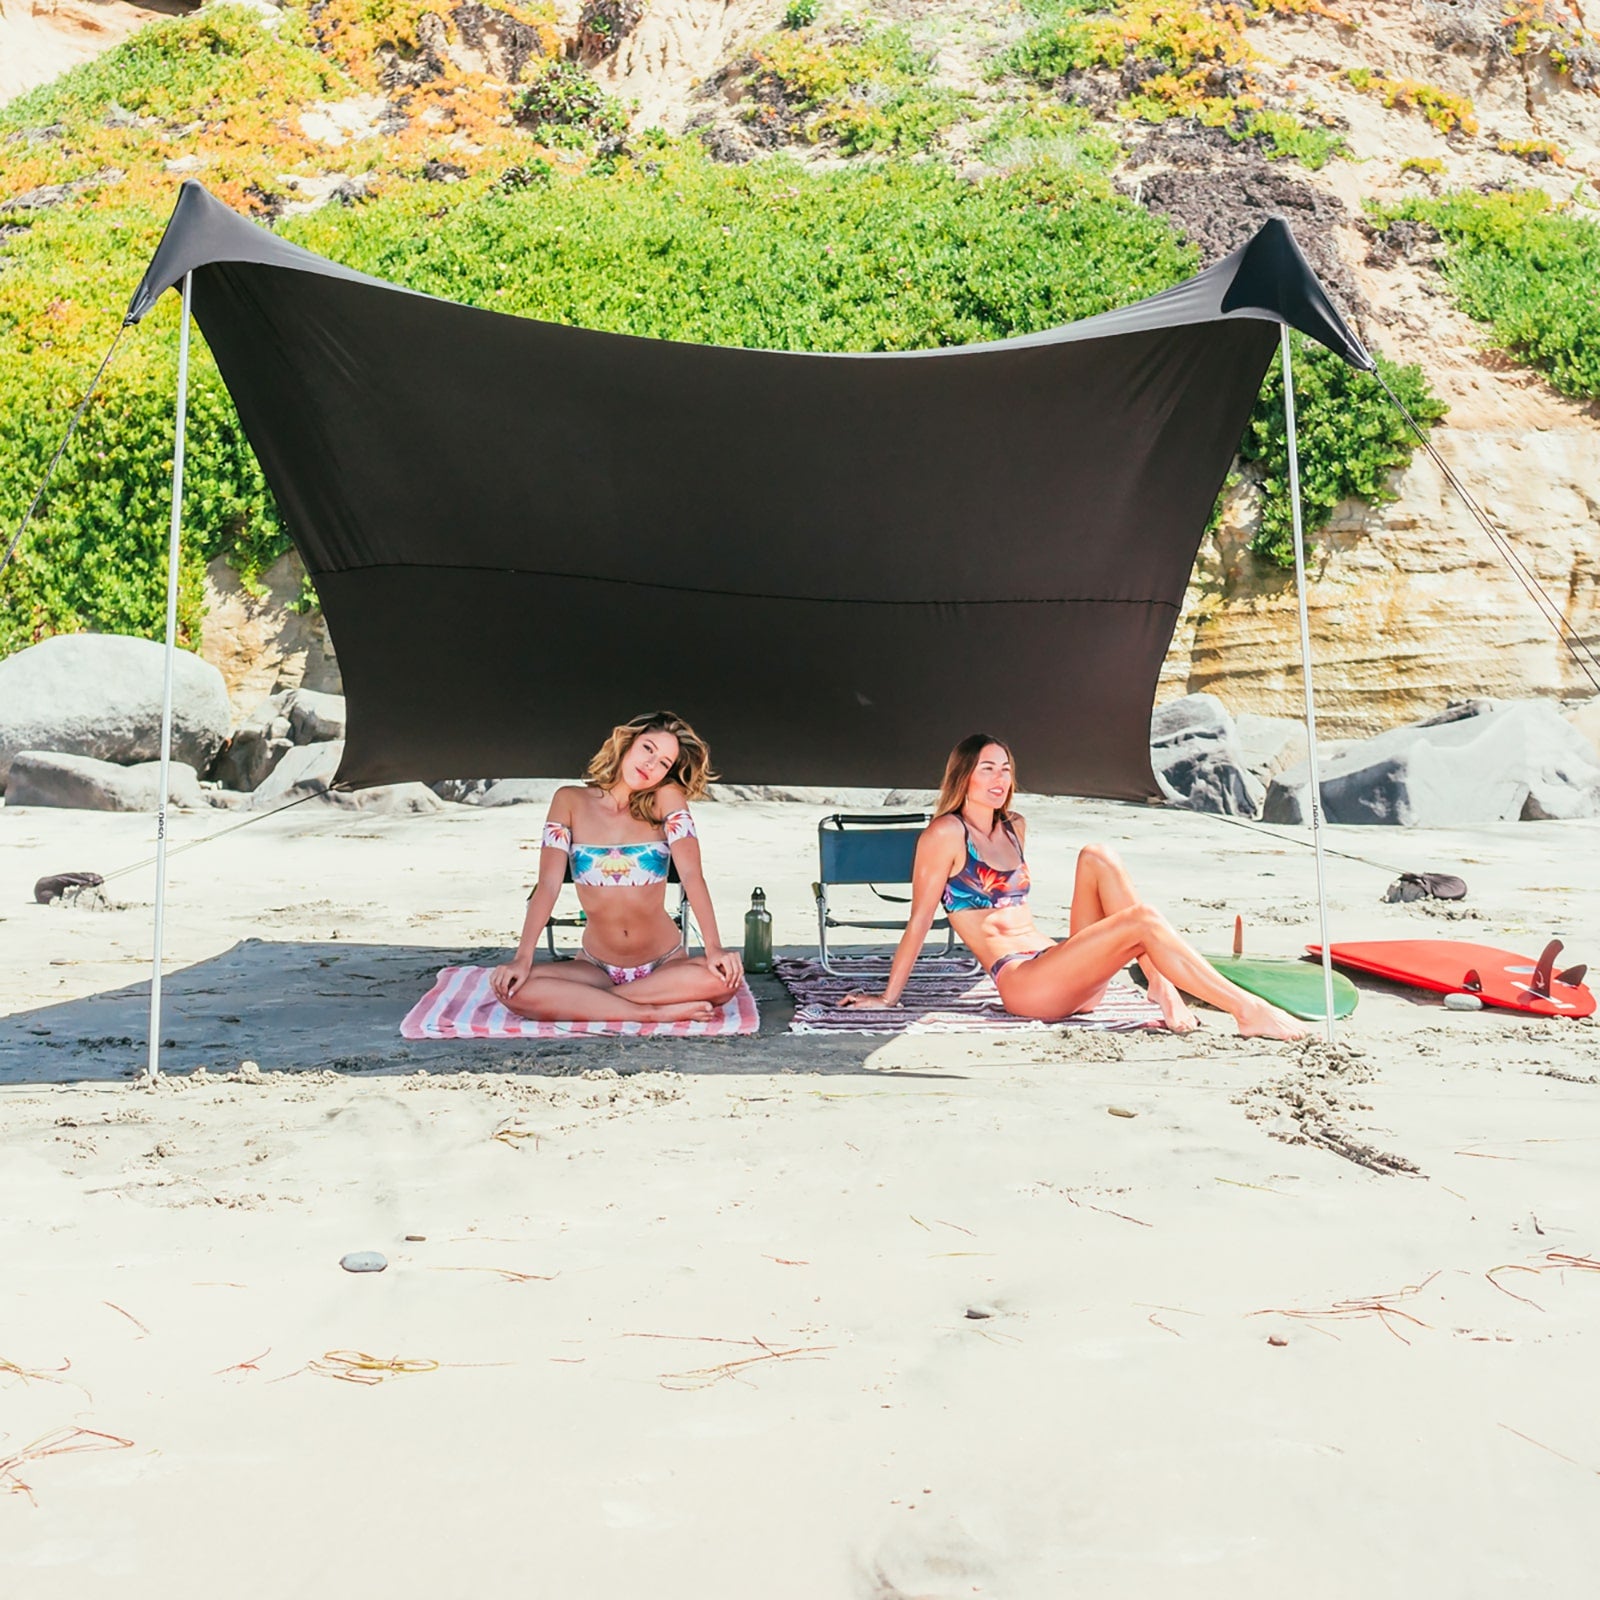 Neso Tents Gigante Beach Tent, 8ft Tall, 11 X 11ft, Biggest Portable Beach  Shade, UPF 50 Sun?Protection, Reinforced Corners And Cooler Poc  サンシェード、ビーチパラソル